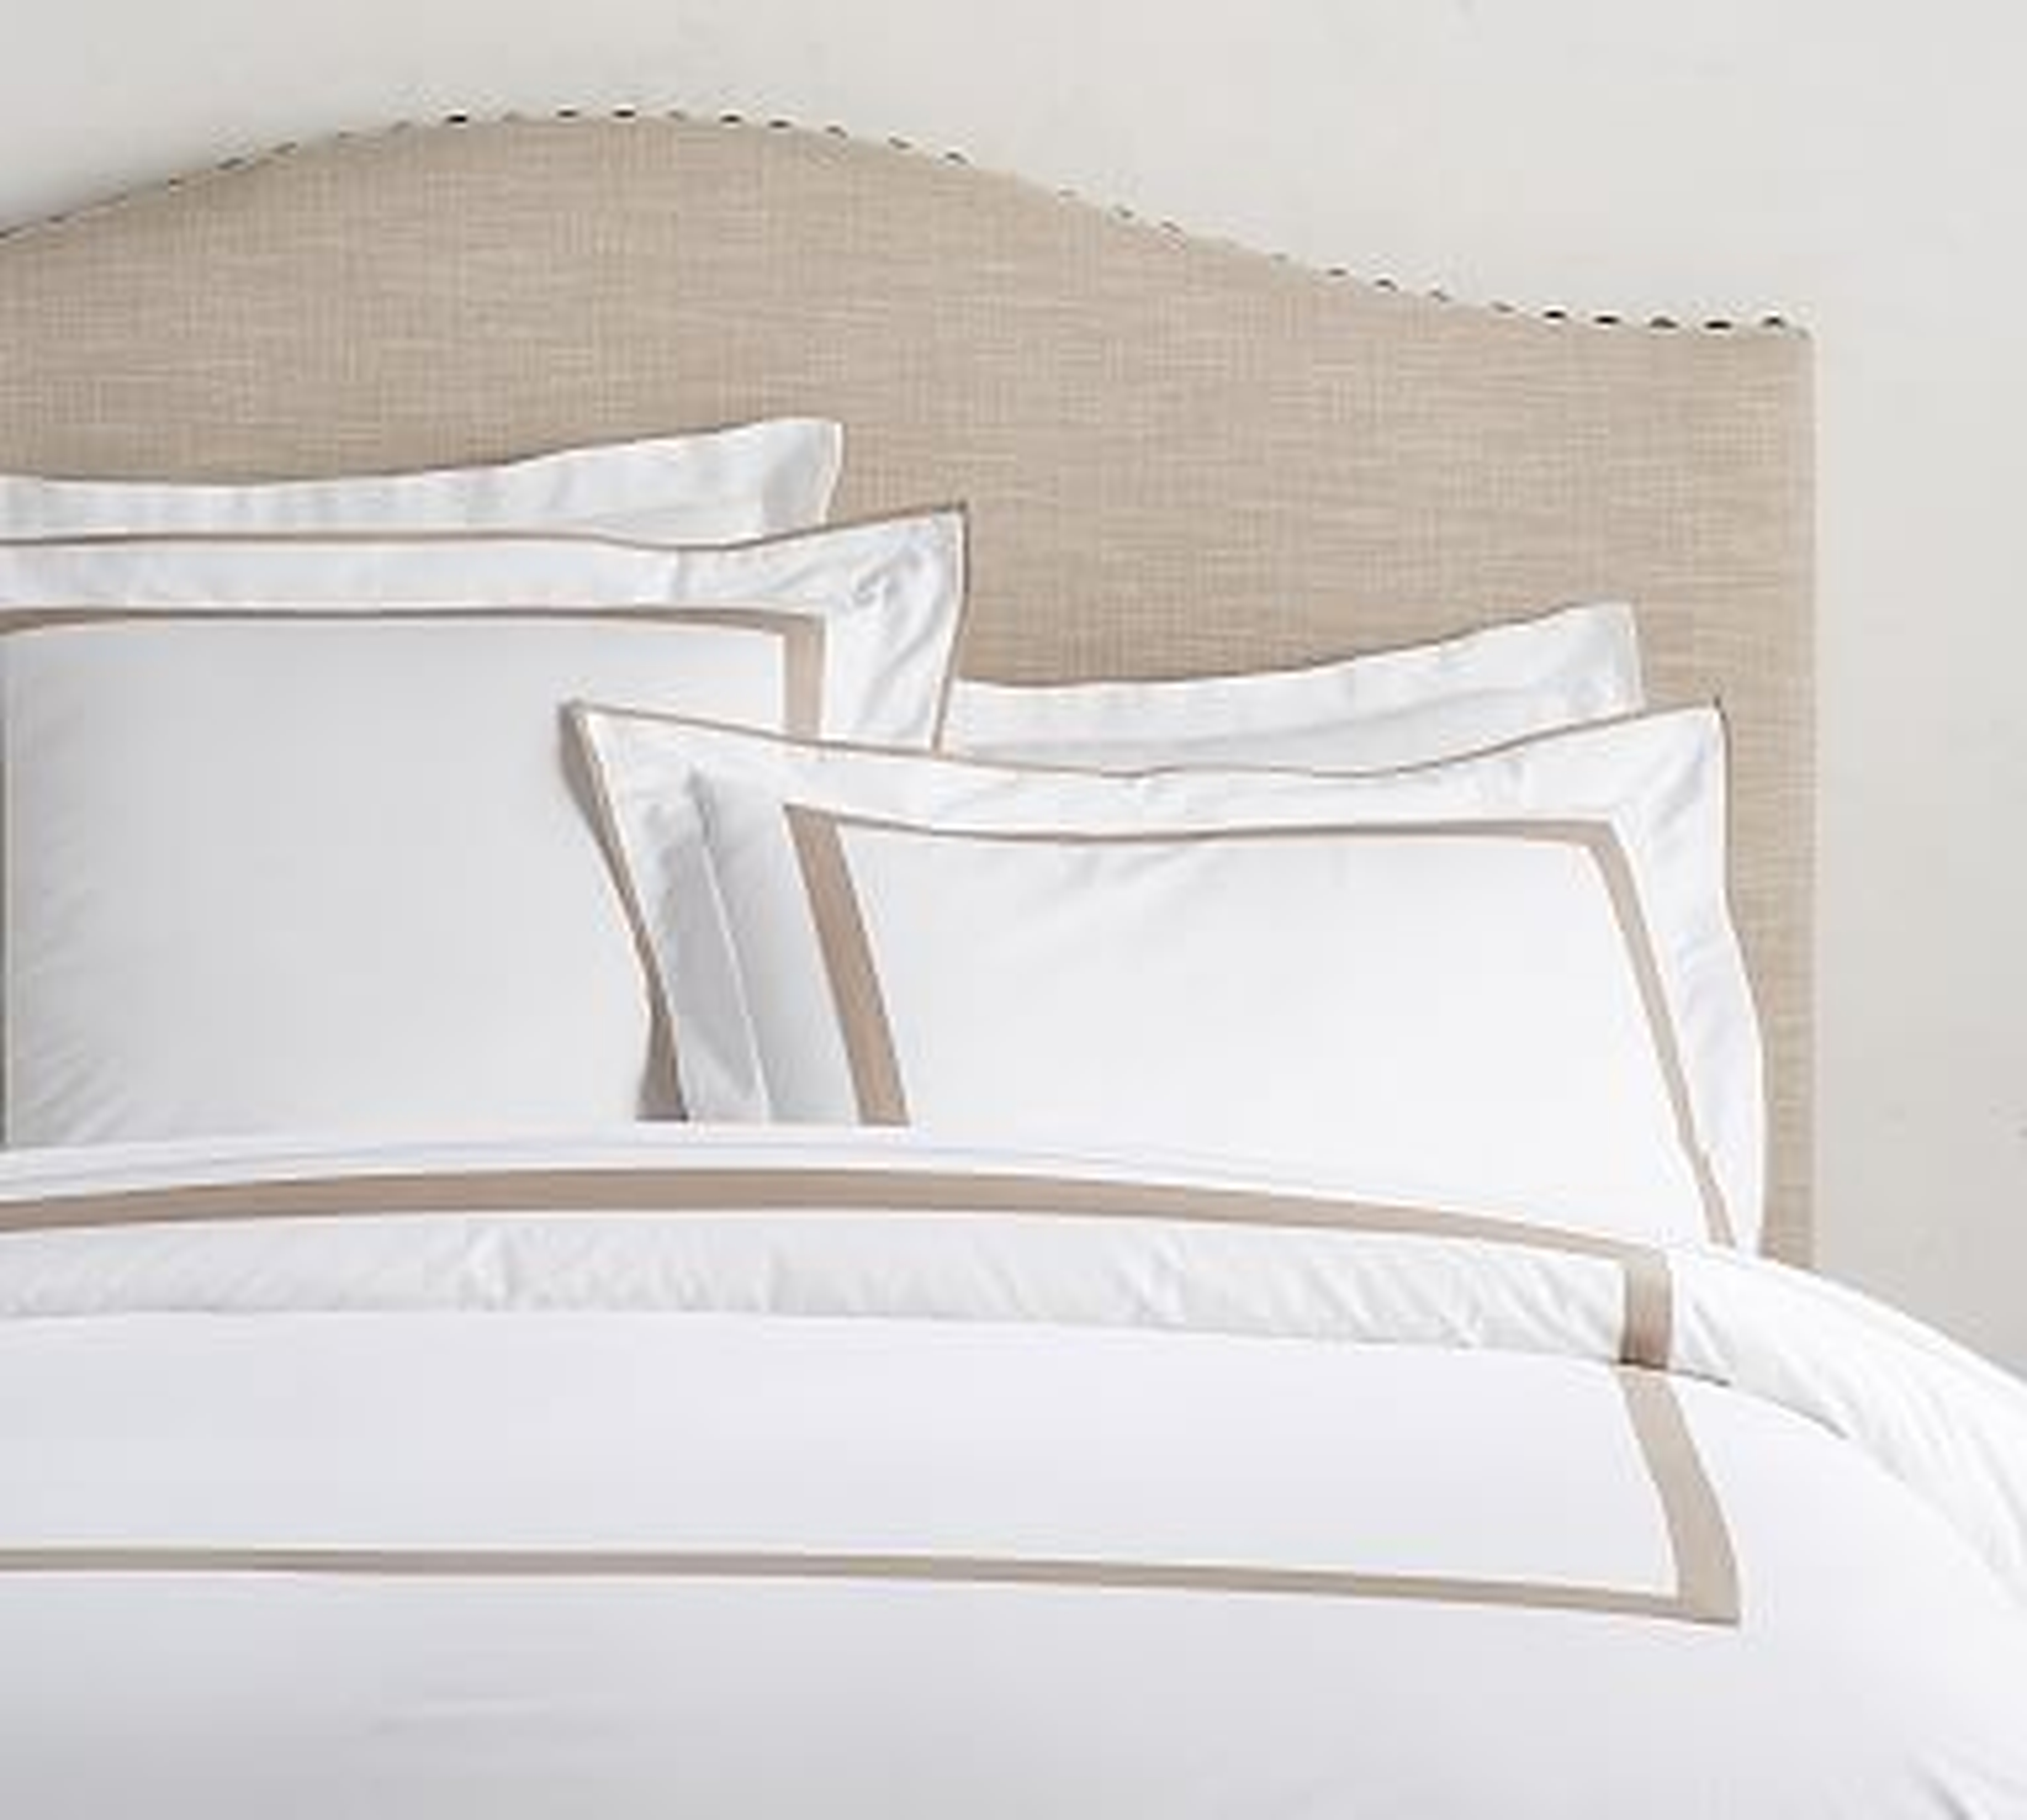 Morgan Organic Duvet Cover, Full/Queen, Simply Taupe - Pottery Barn